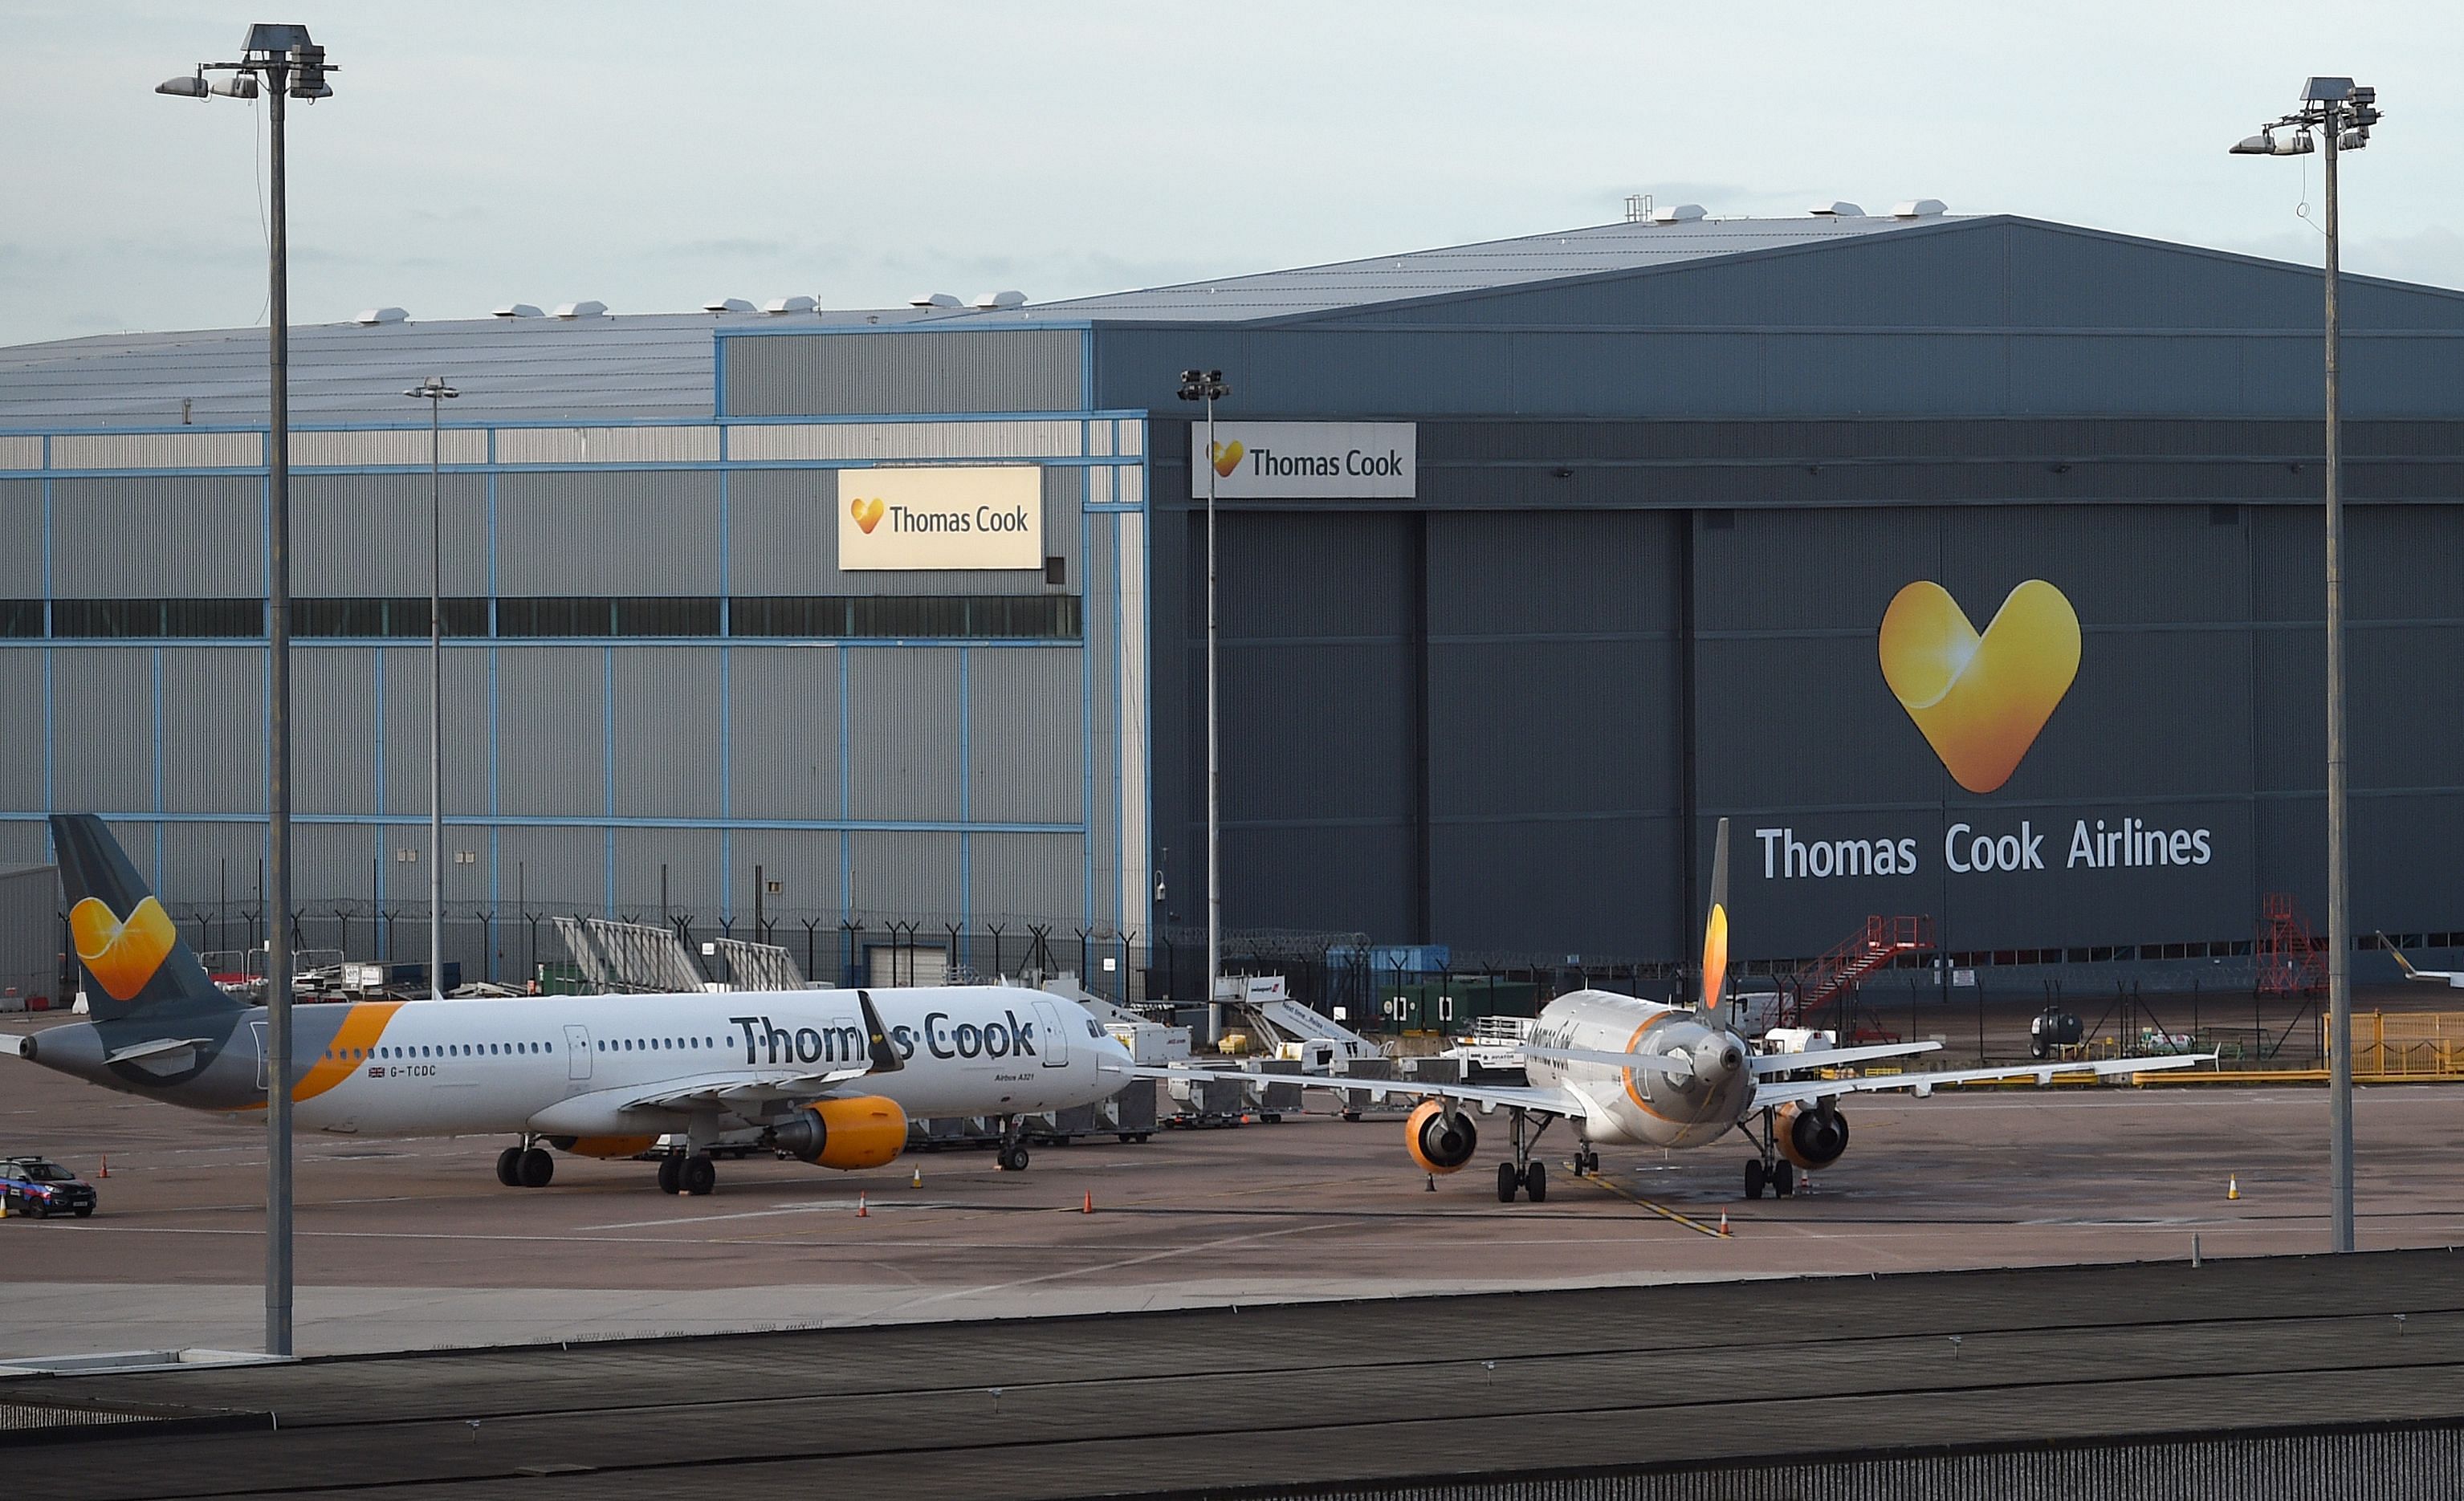 Thomas Cook passenger aircraft stand at on the tarmac outside the company's hangar at Manchester Airport in Manchester, northern England. (AFP Photo)